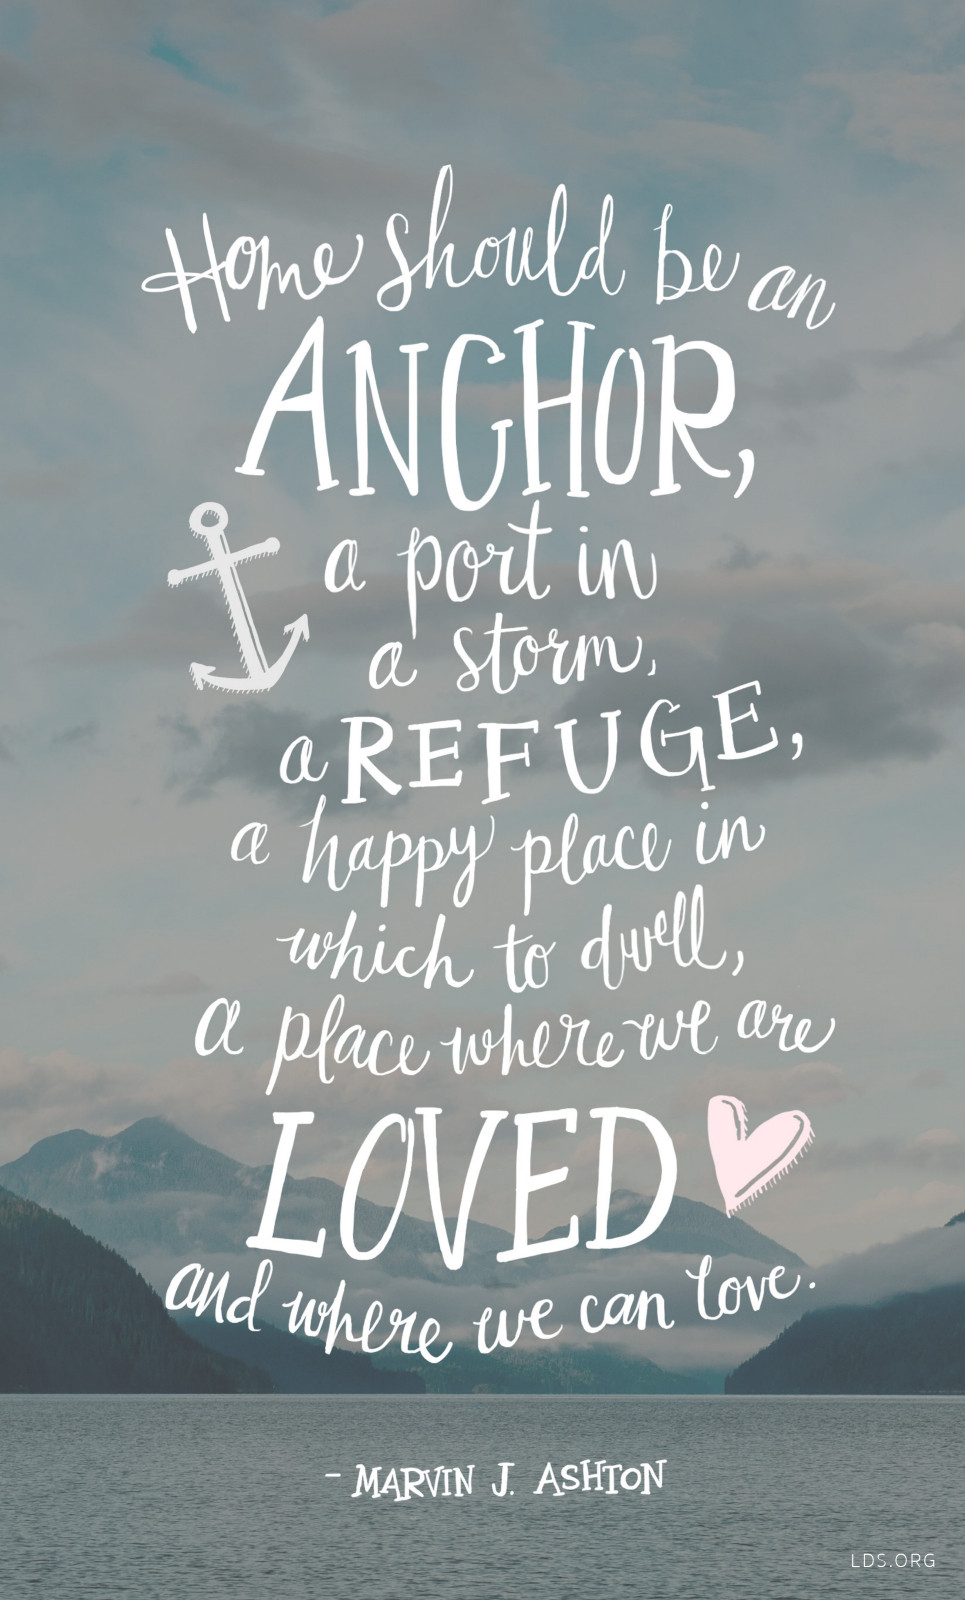 Lds Family Quotes
 Home Should Be an Anchor